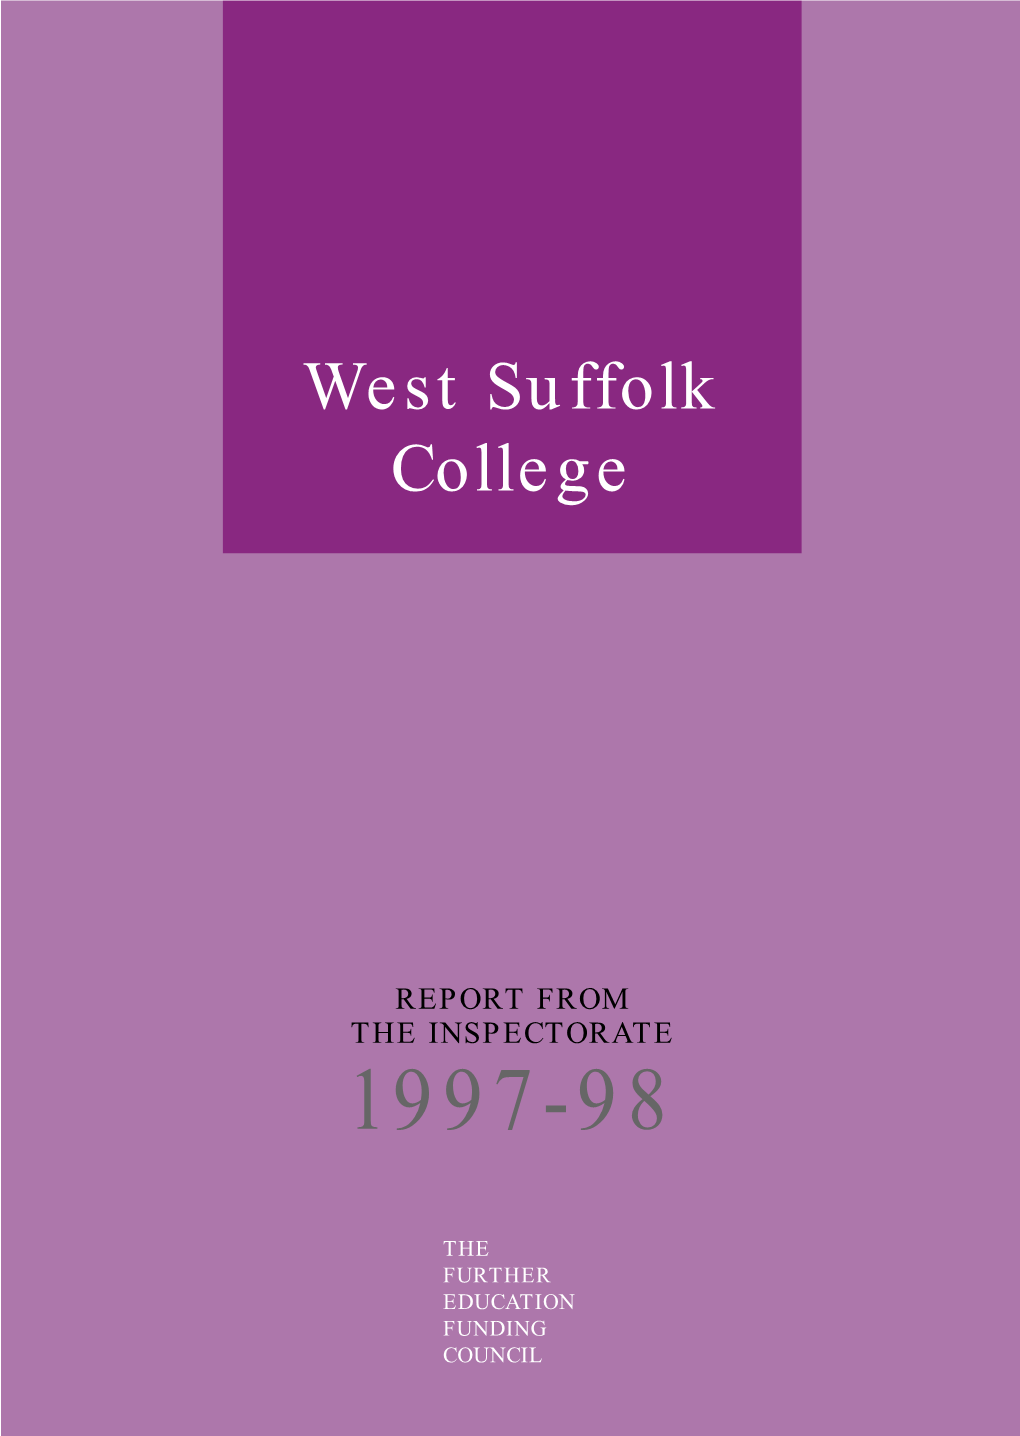 WEST SUFFOLK COLLEGE 24/2/98 3:50 Pm Page A